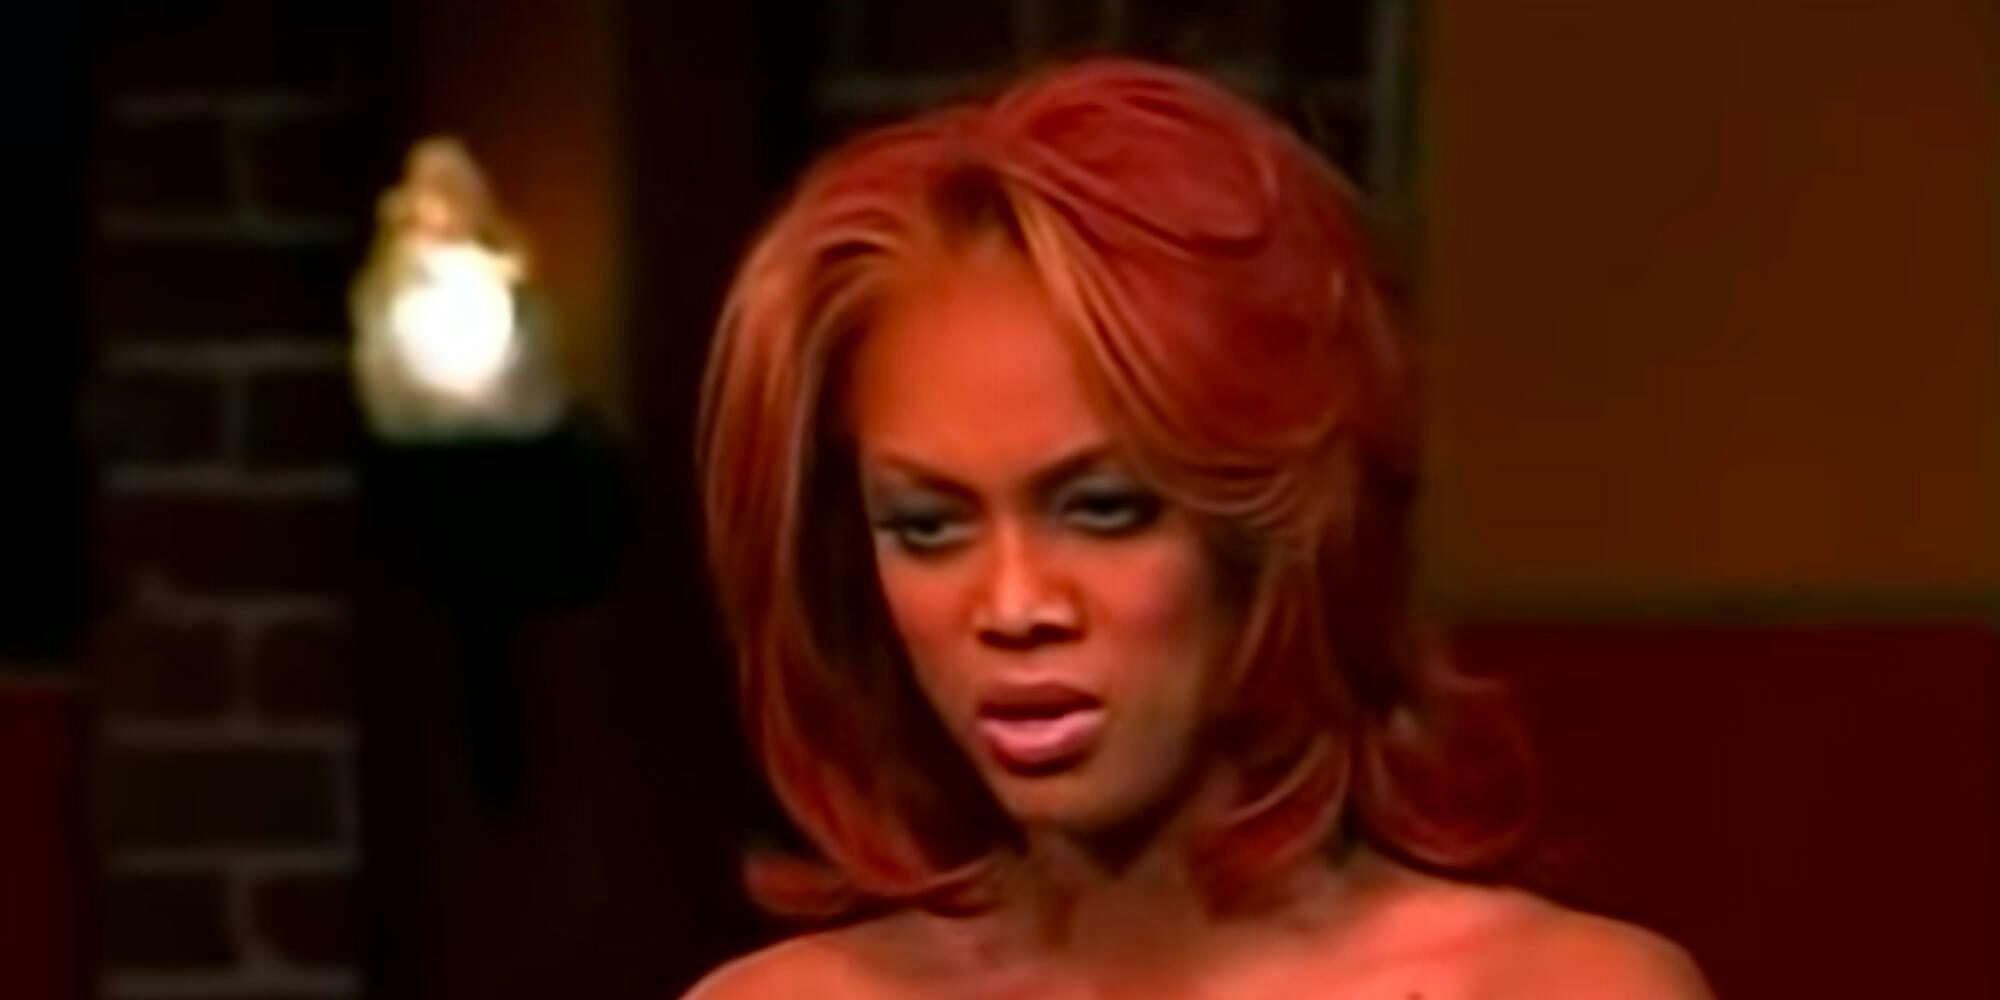 People Are Dragging Tyra Banks as They Find Old 'ANTM' Clips